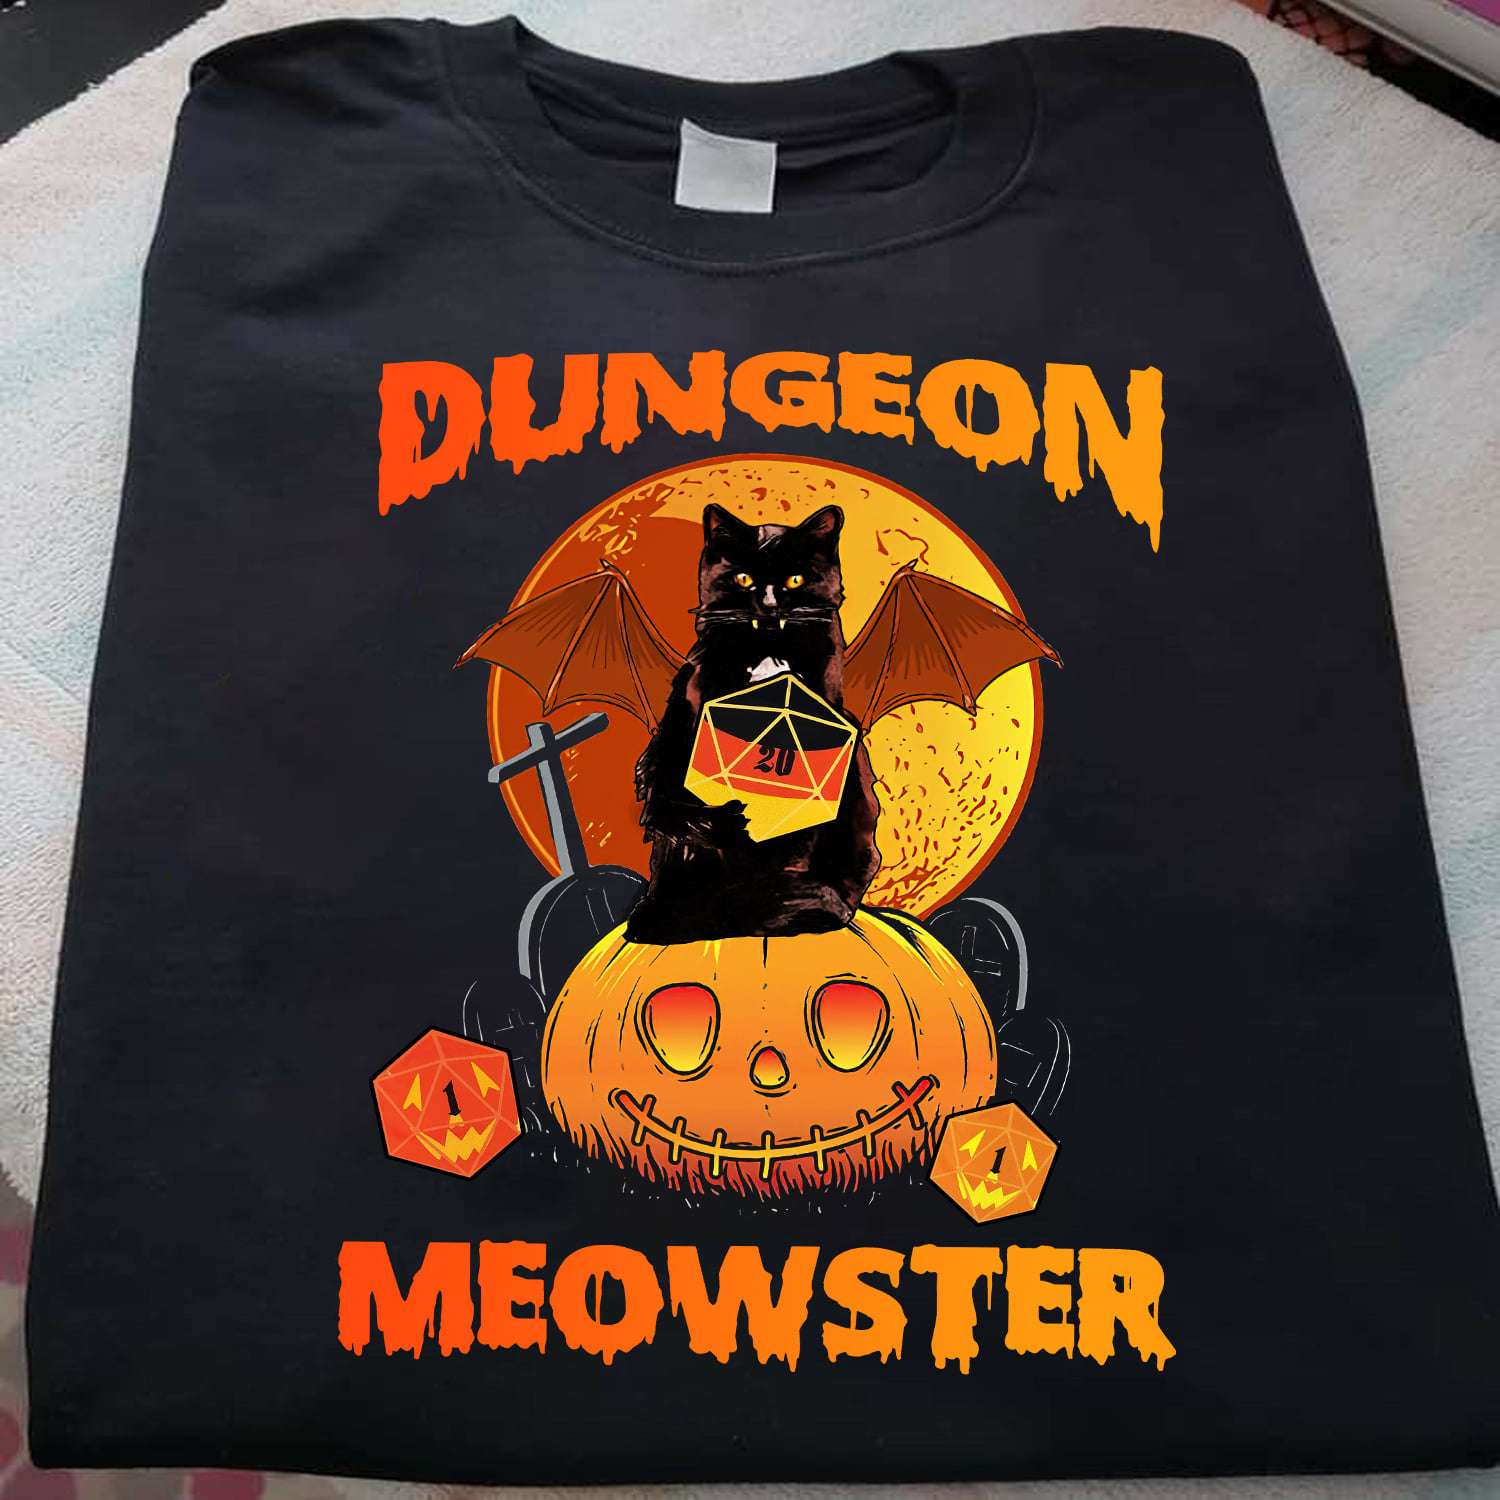 Dungeon meowster - Dungeons and Dragons, Black cat bat, Gift for Halloween